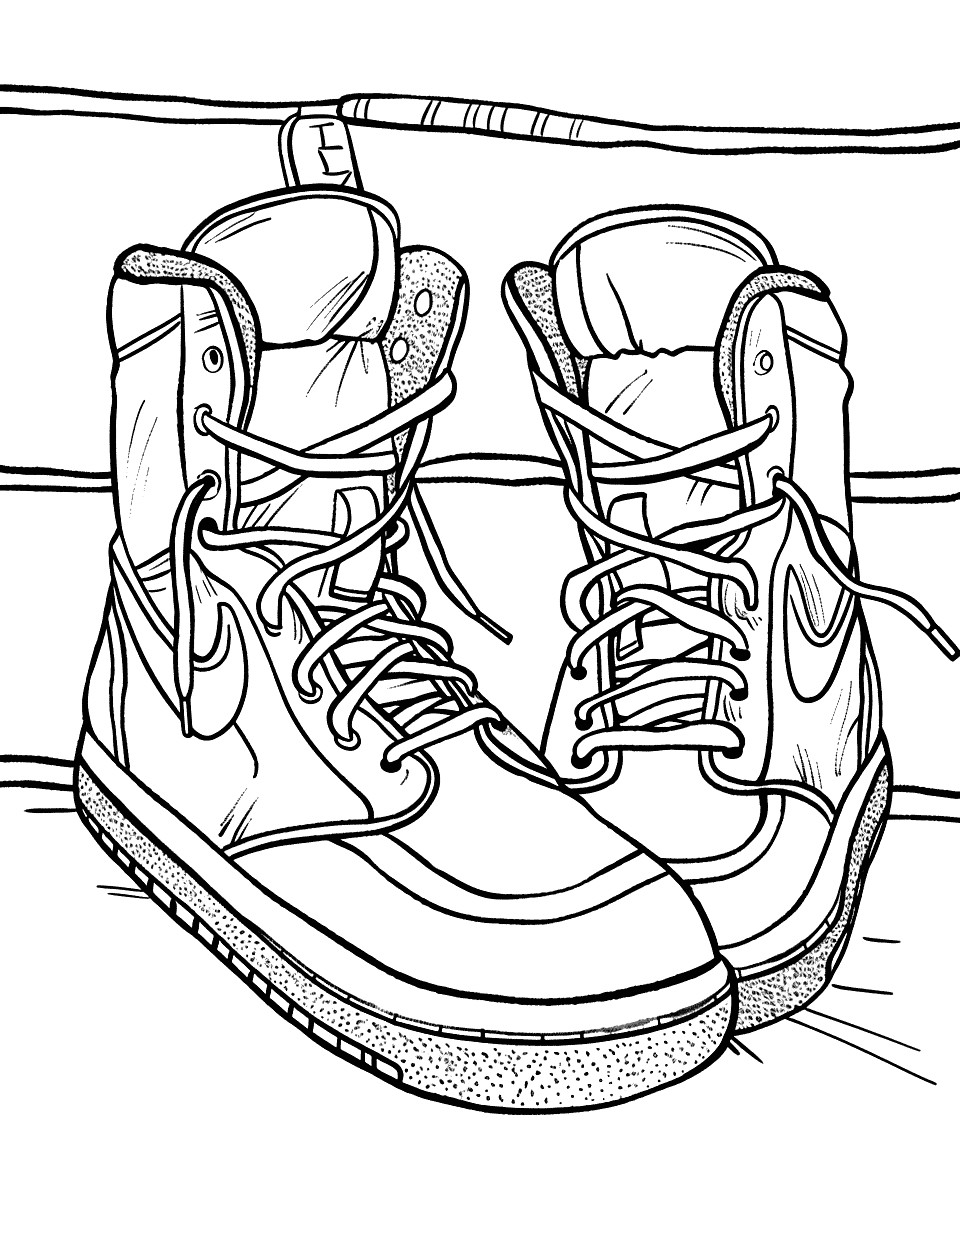 Boxing Shoes in the Ring Shoe Coloring Page - Boxing shoes at the corner of a boxing ring.